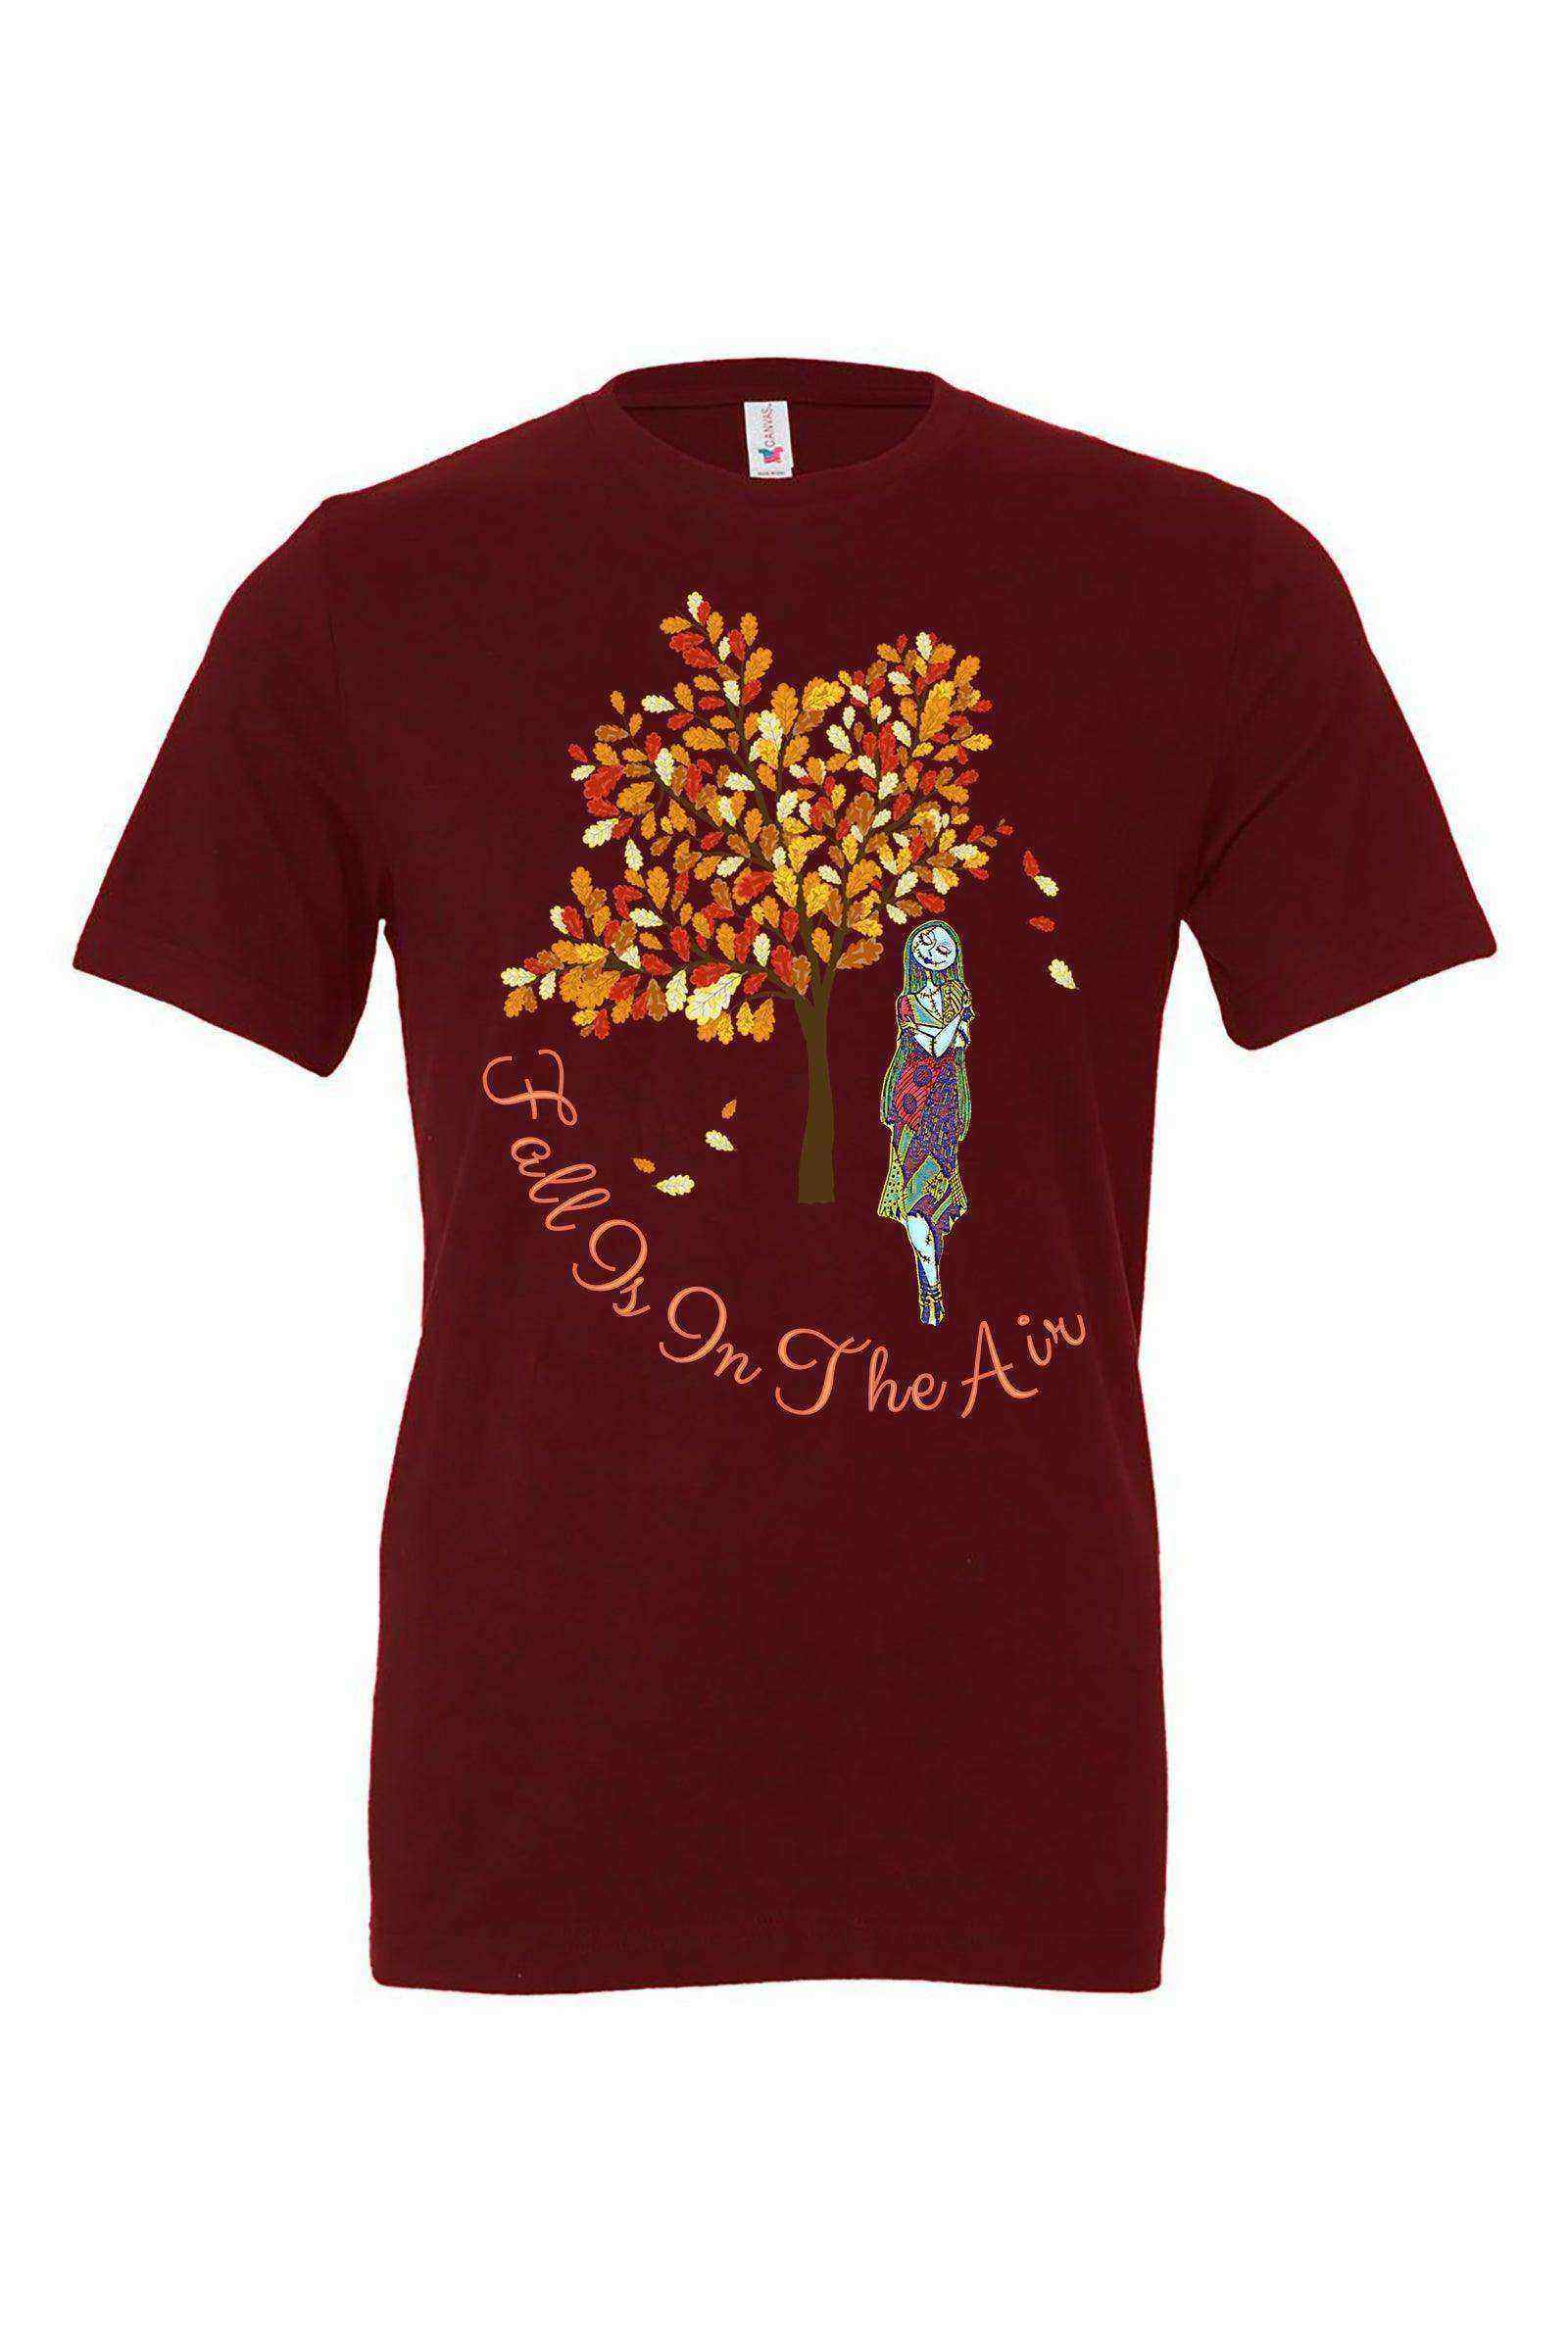 Fall Is In The Air Sally Shirt | Nightmare Before Christmas Shirt - Dylan's Tees